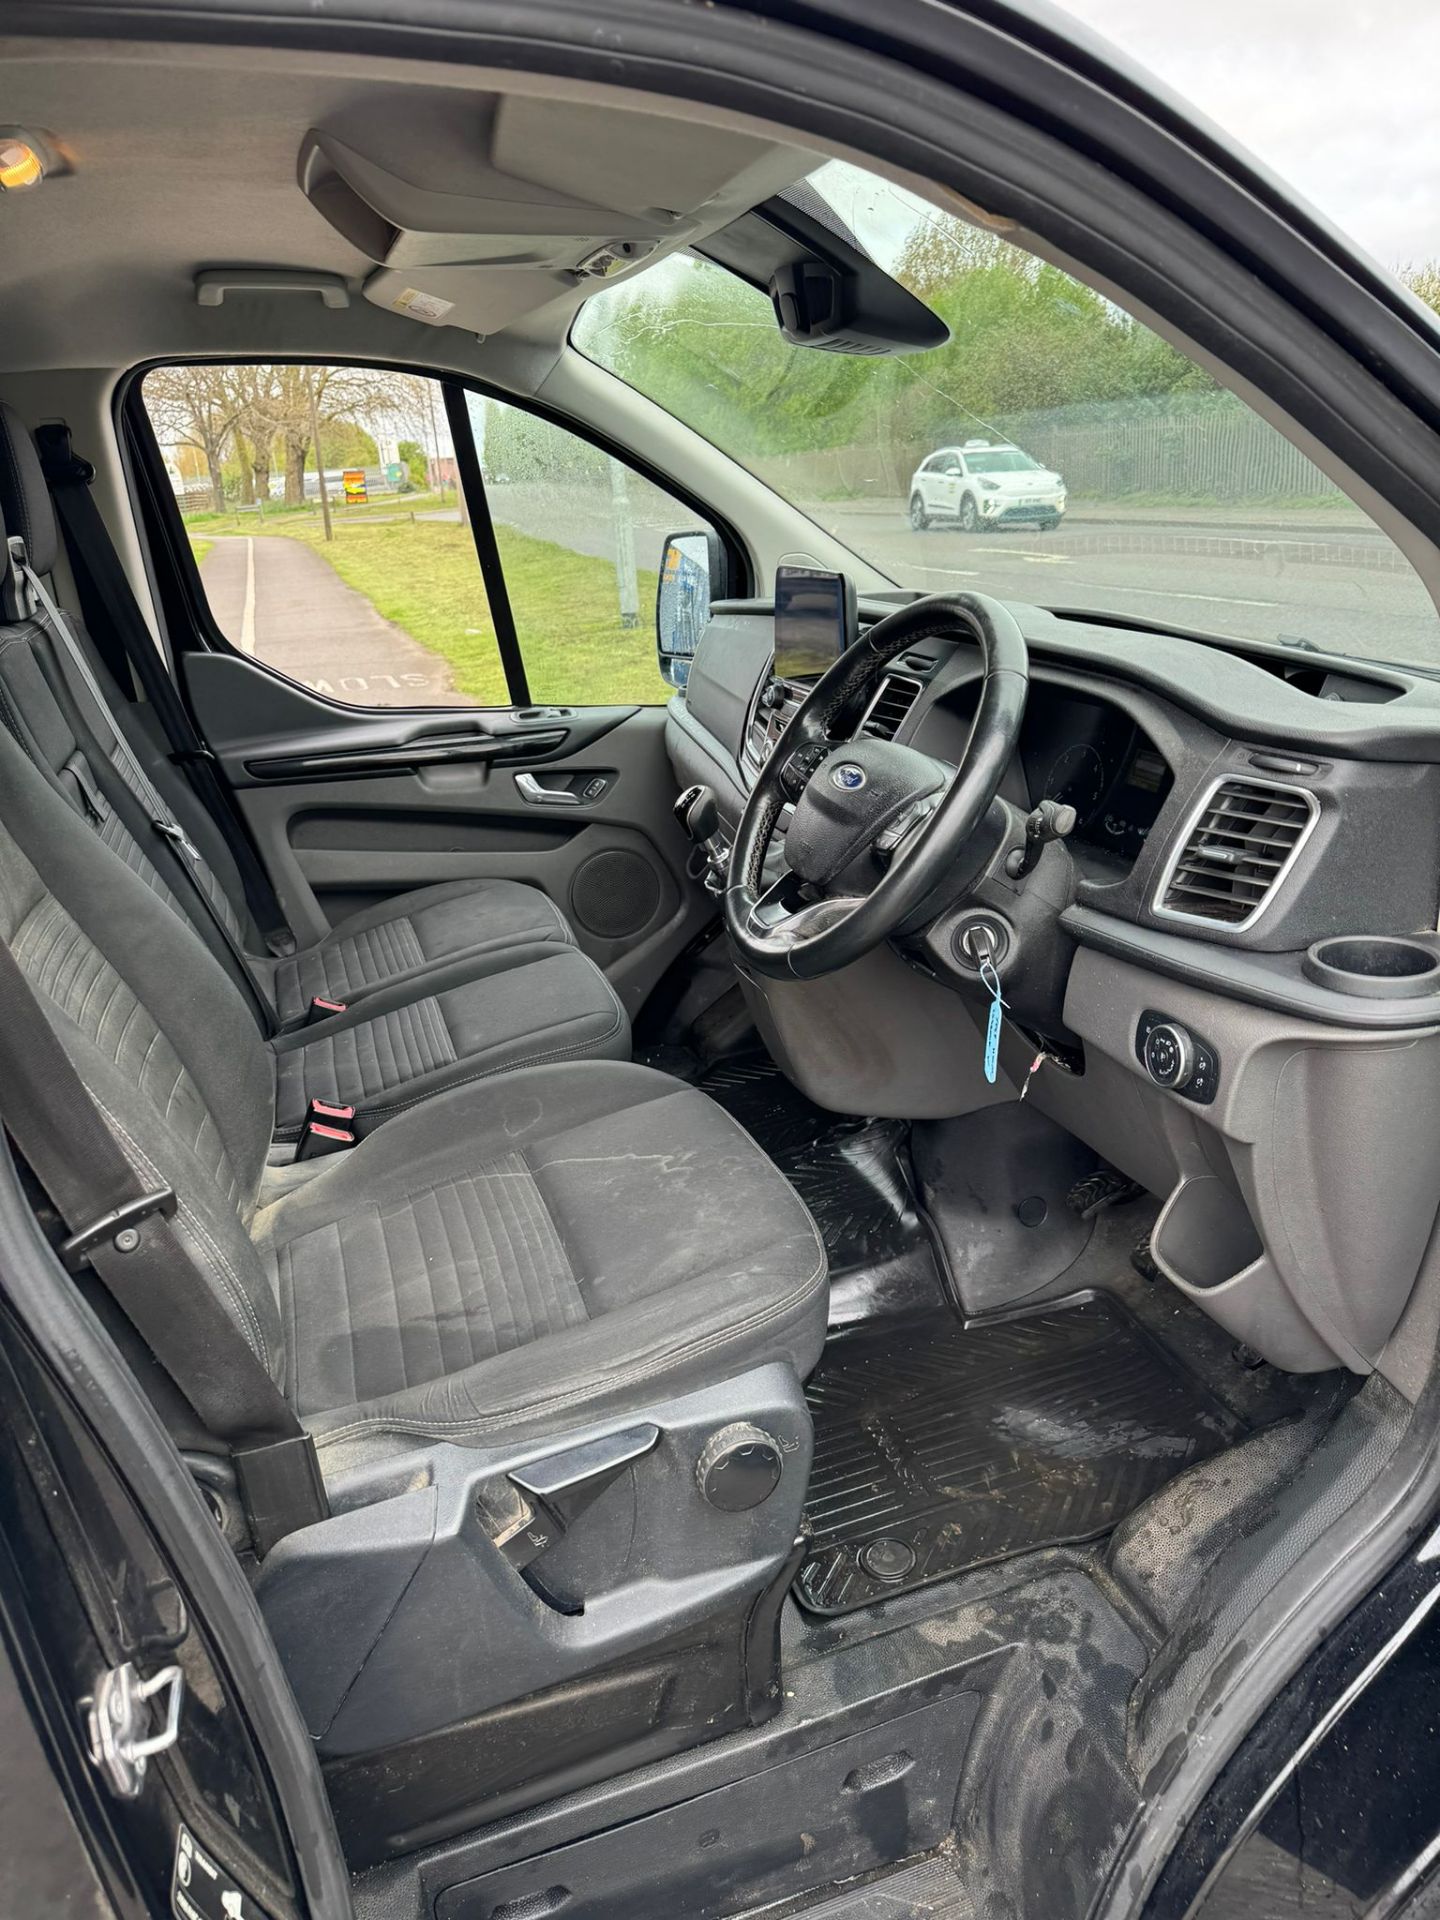 2018 68 FORD TRANSIT CUSTOM LIMITED PANEL VAN - 114K MILES - EURO 6 - AIR CON -  ALLOY WHEELS  - Image 6 of 12